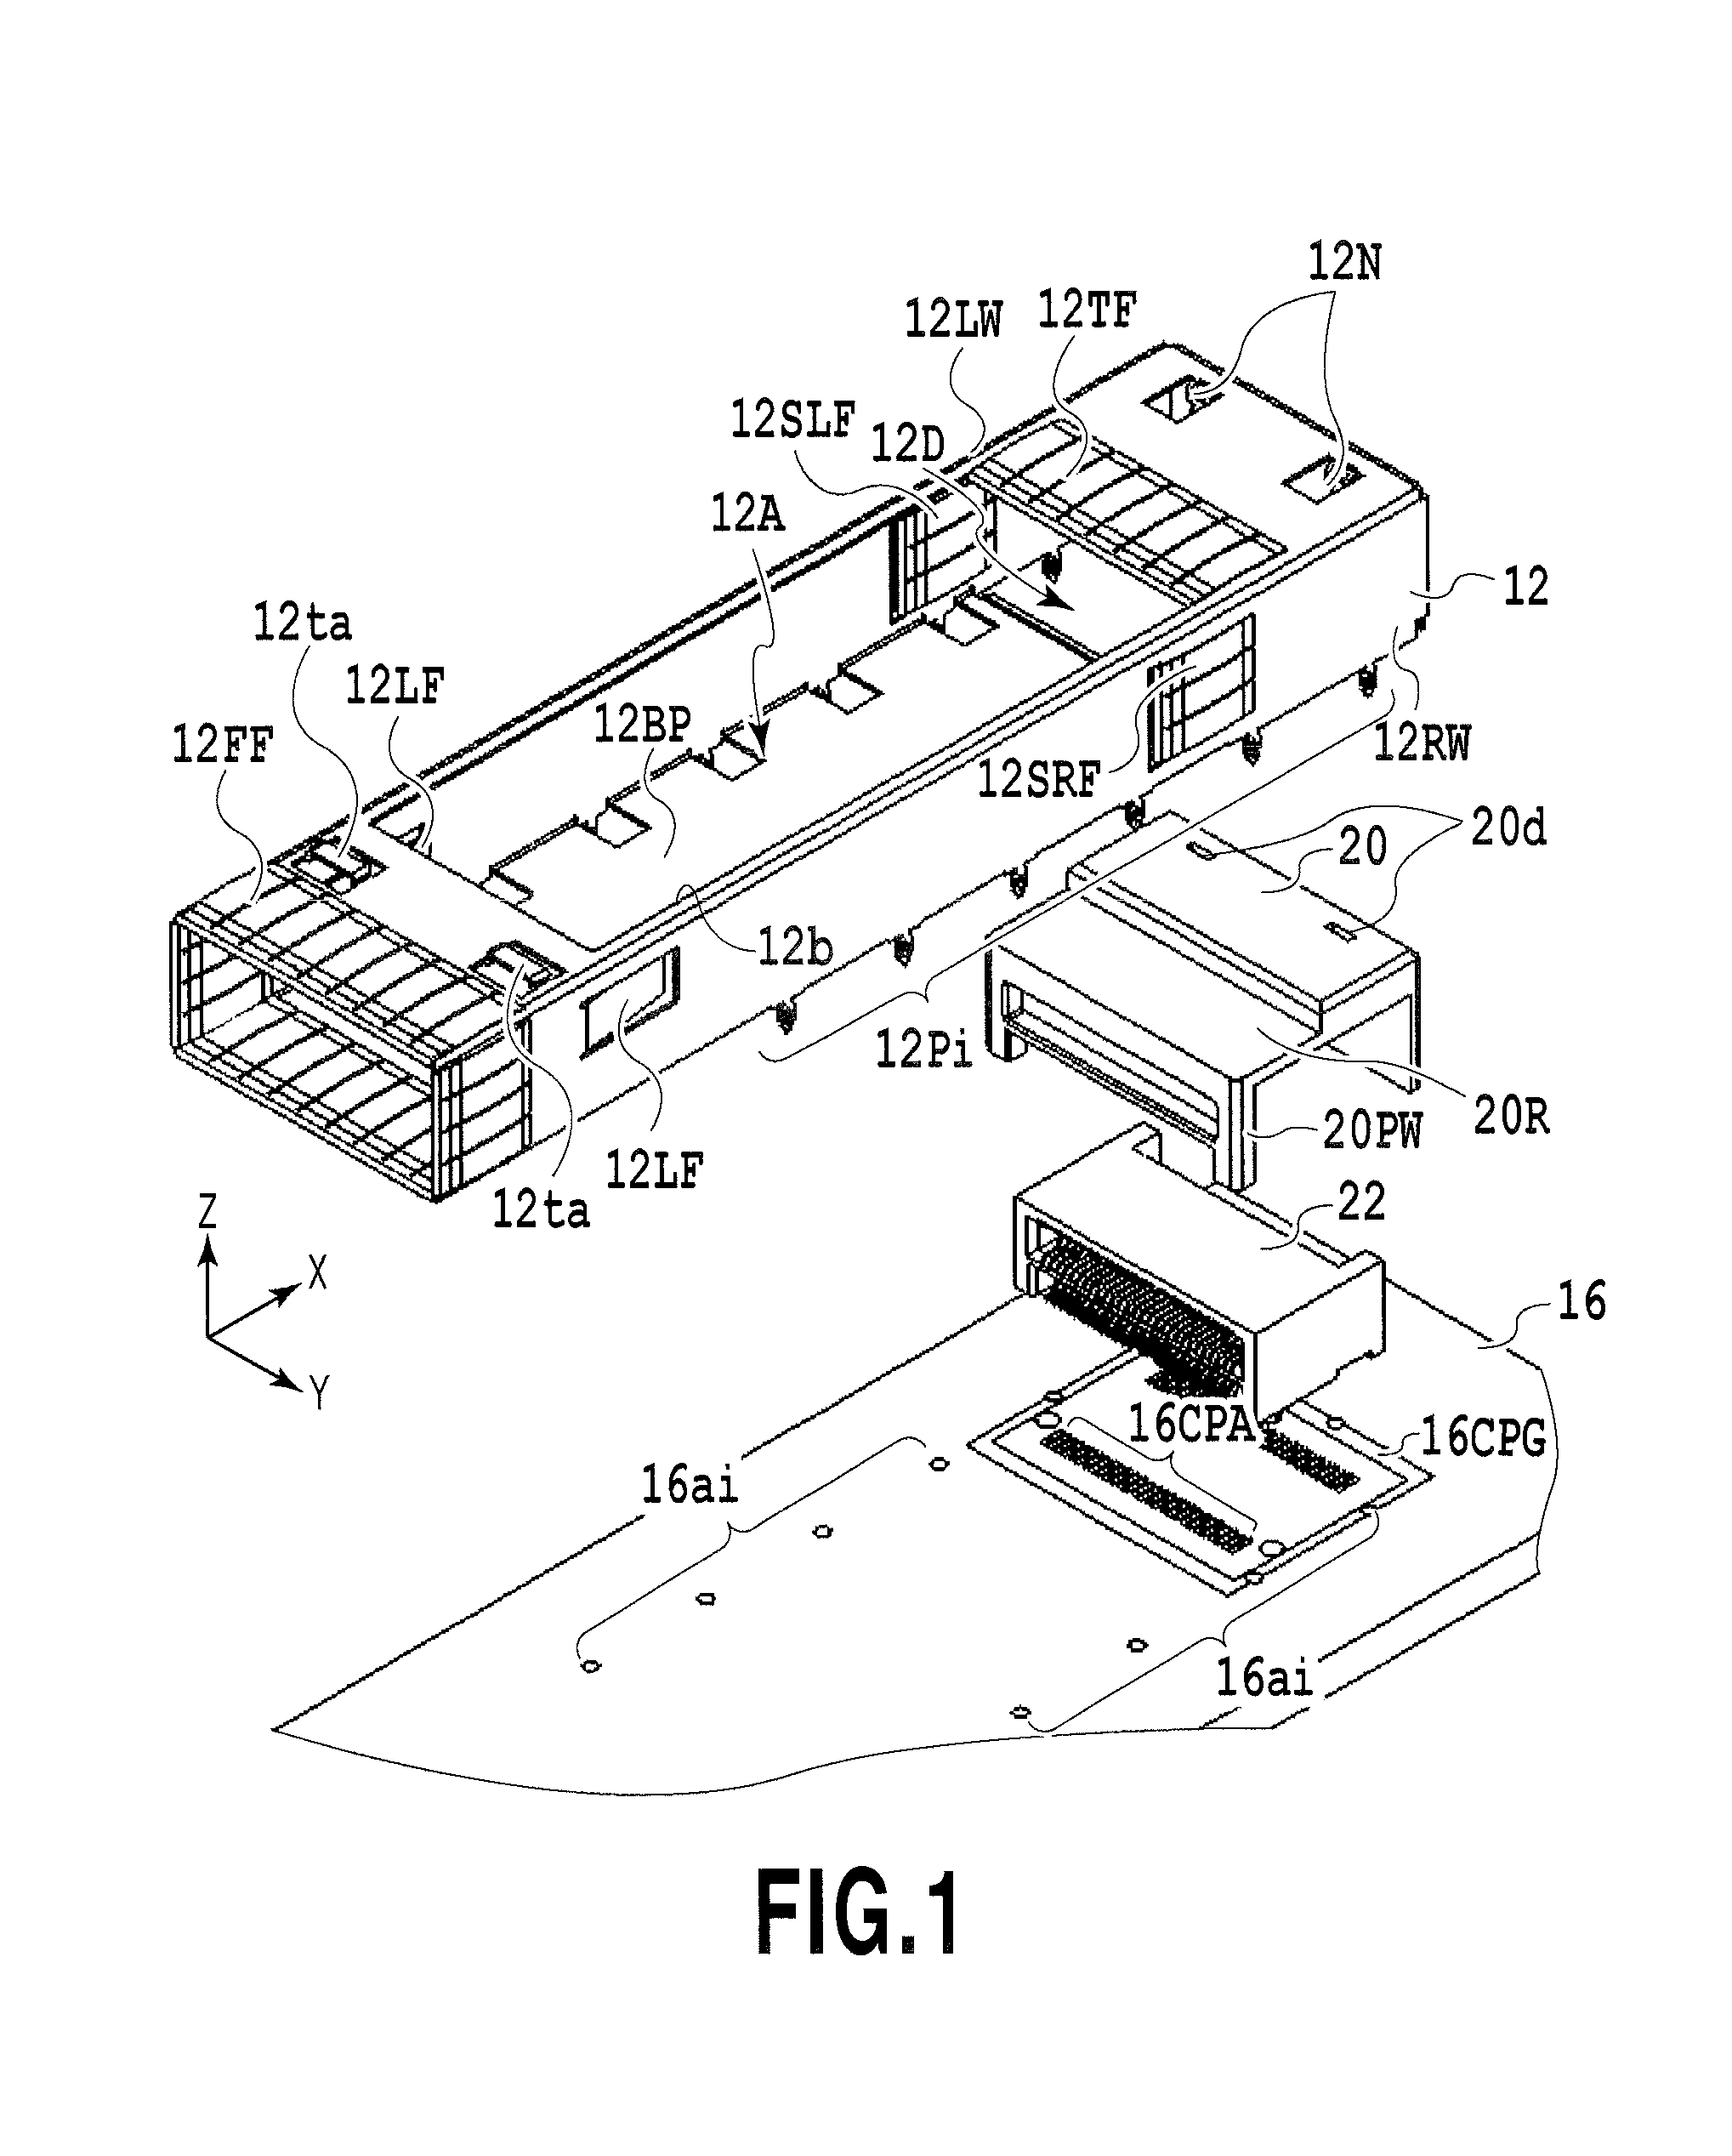 Receptacle cage, receptacle assembly, and transceiver module assembly